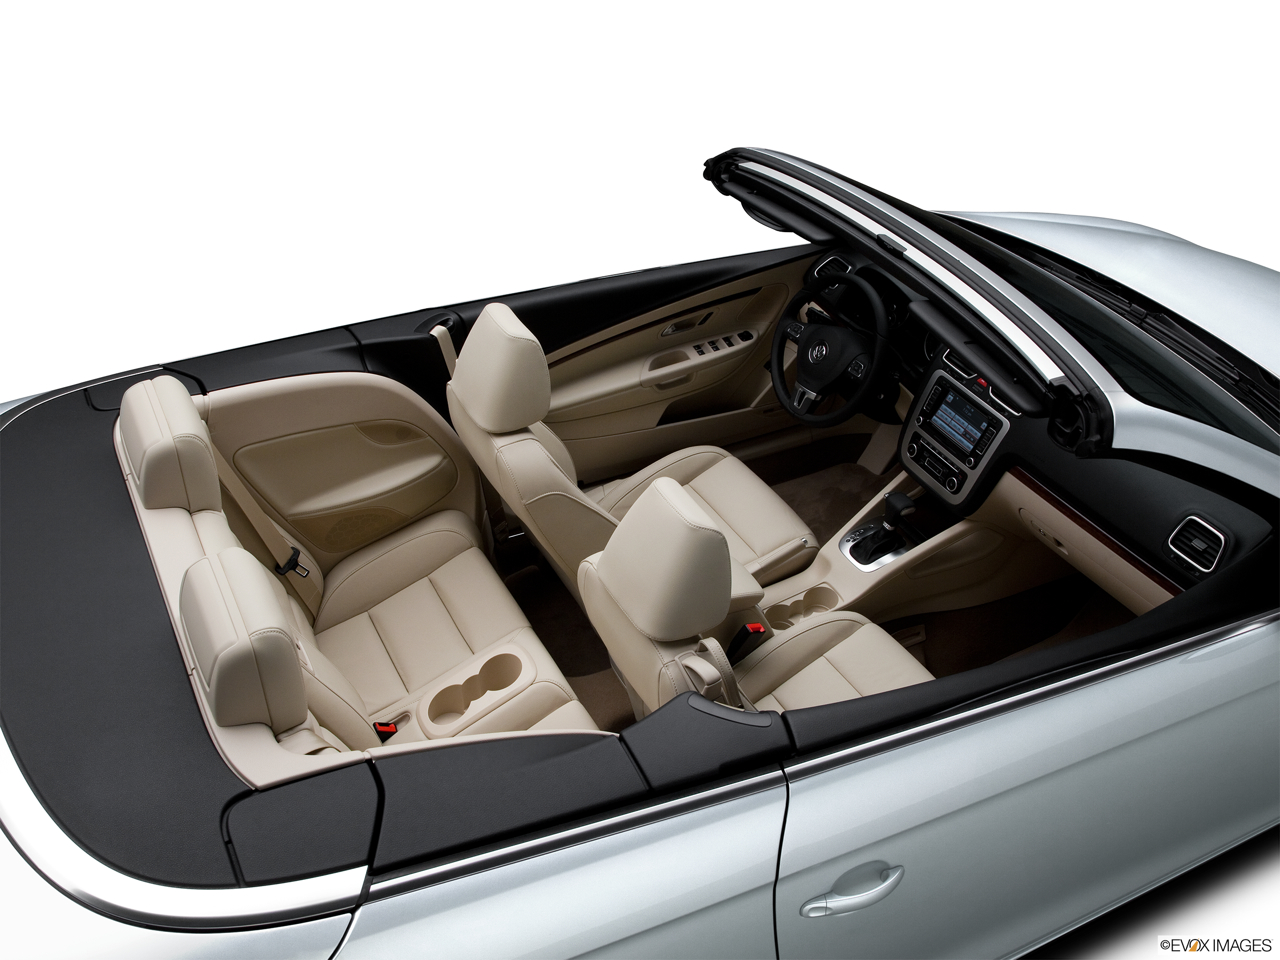 2011 Volkswagen Eos Lux Convertible Hero (high from passenger, looking down into interior). 